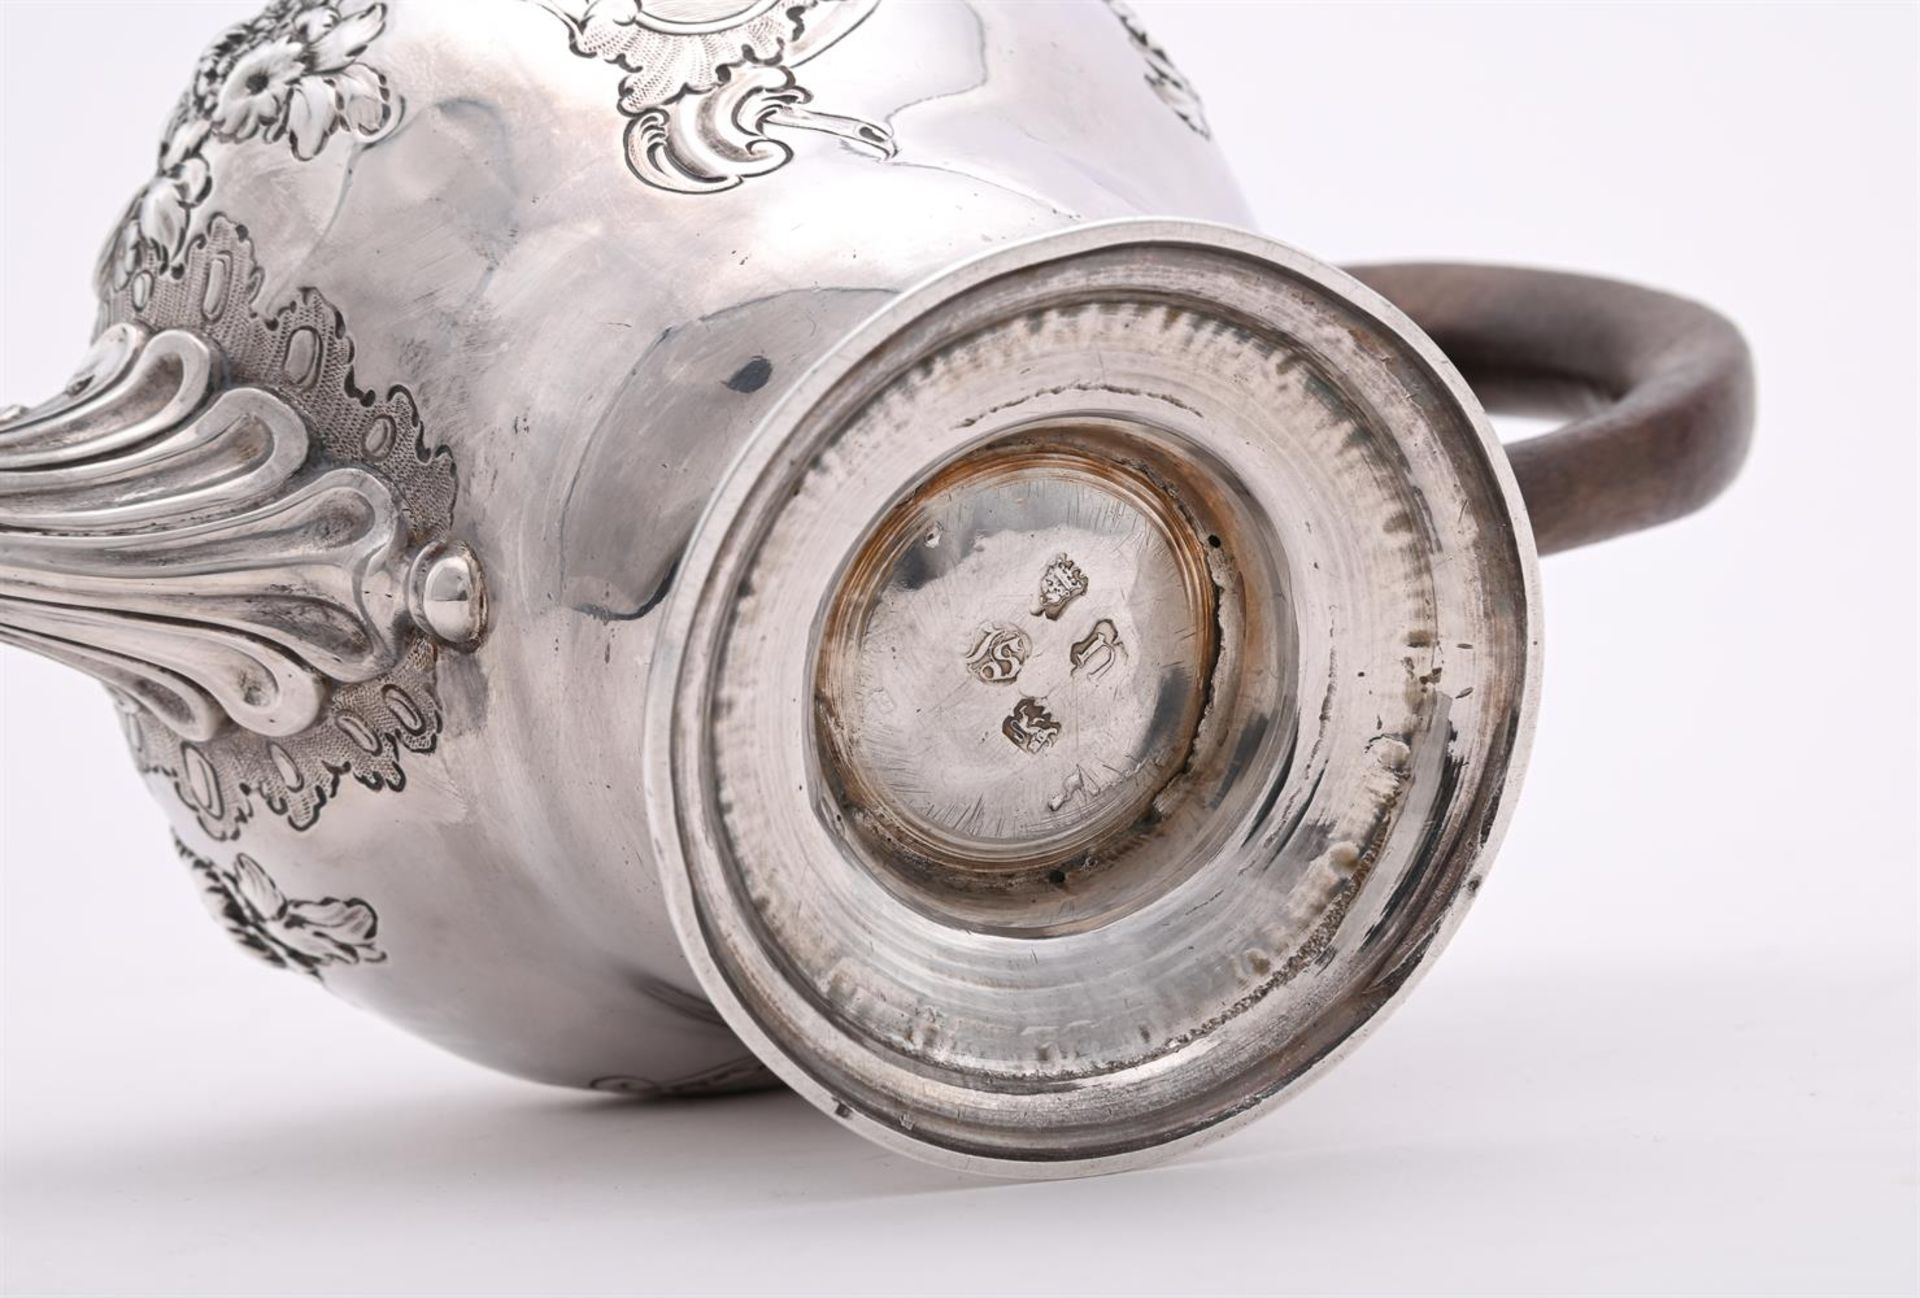 A GEORGE II SILVER INVERTED PEAR SHAPED TEAPOT - Image 2 of 2